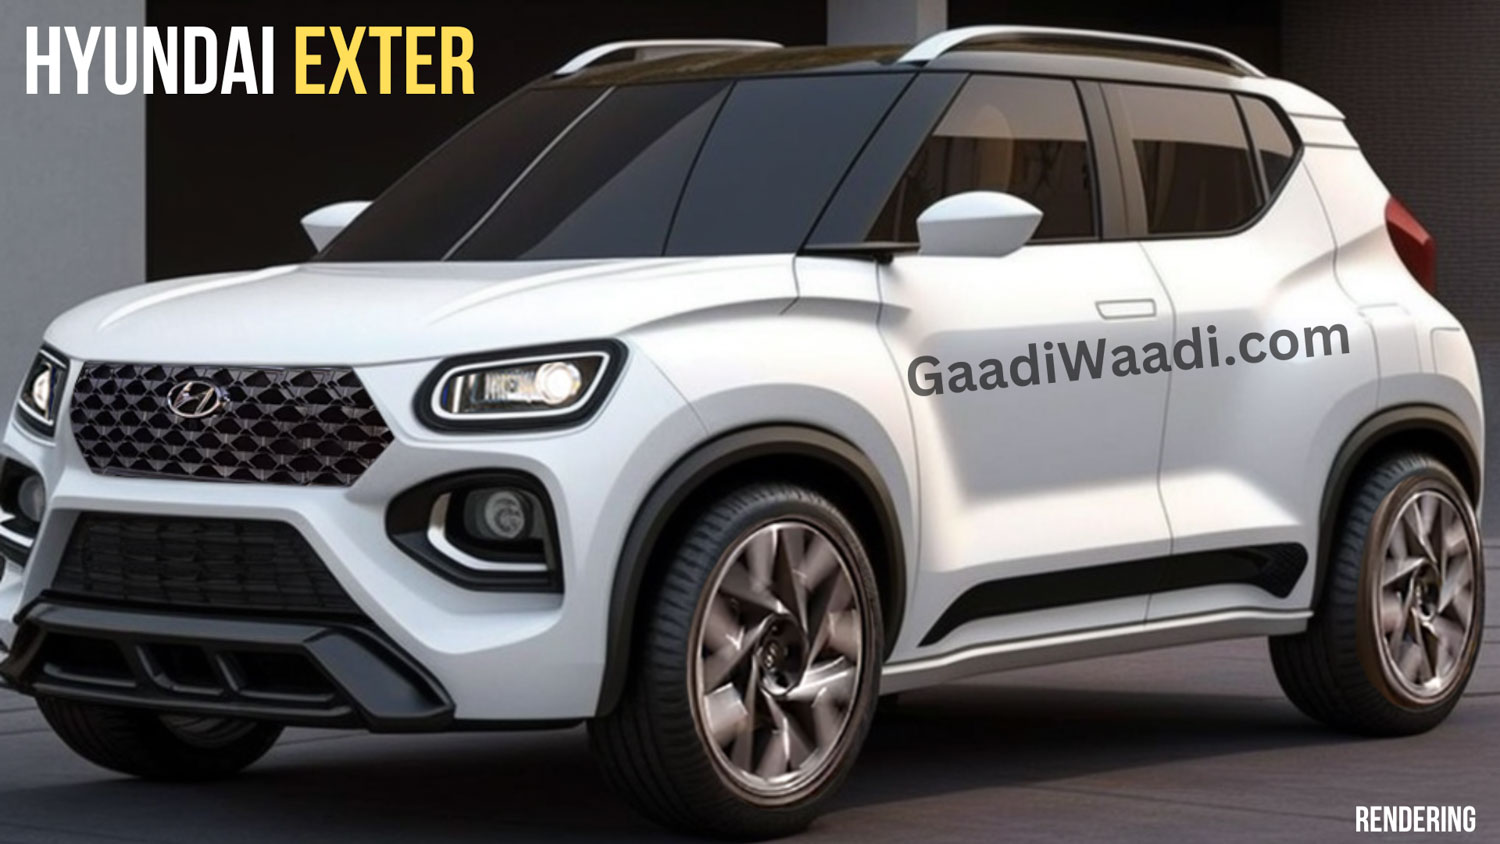 Breaking News! Hyundai Exter Is The Name Of Upcoming SUV